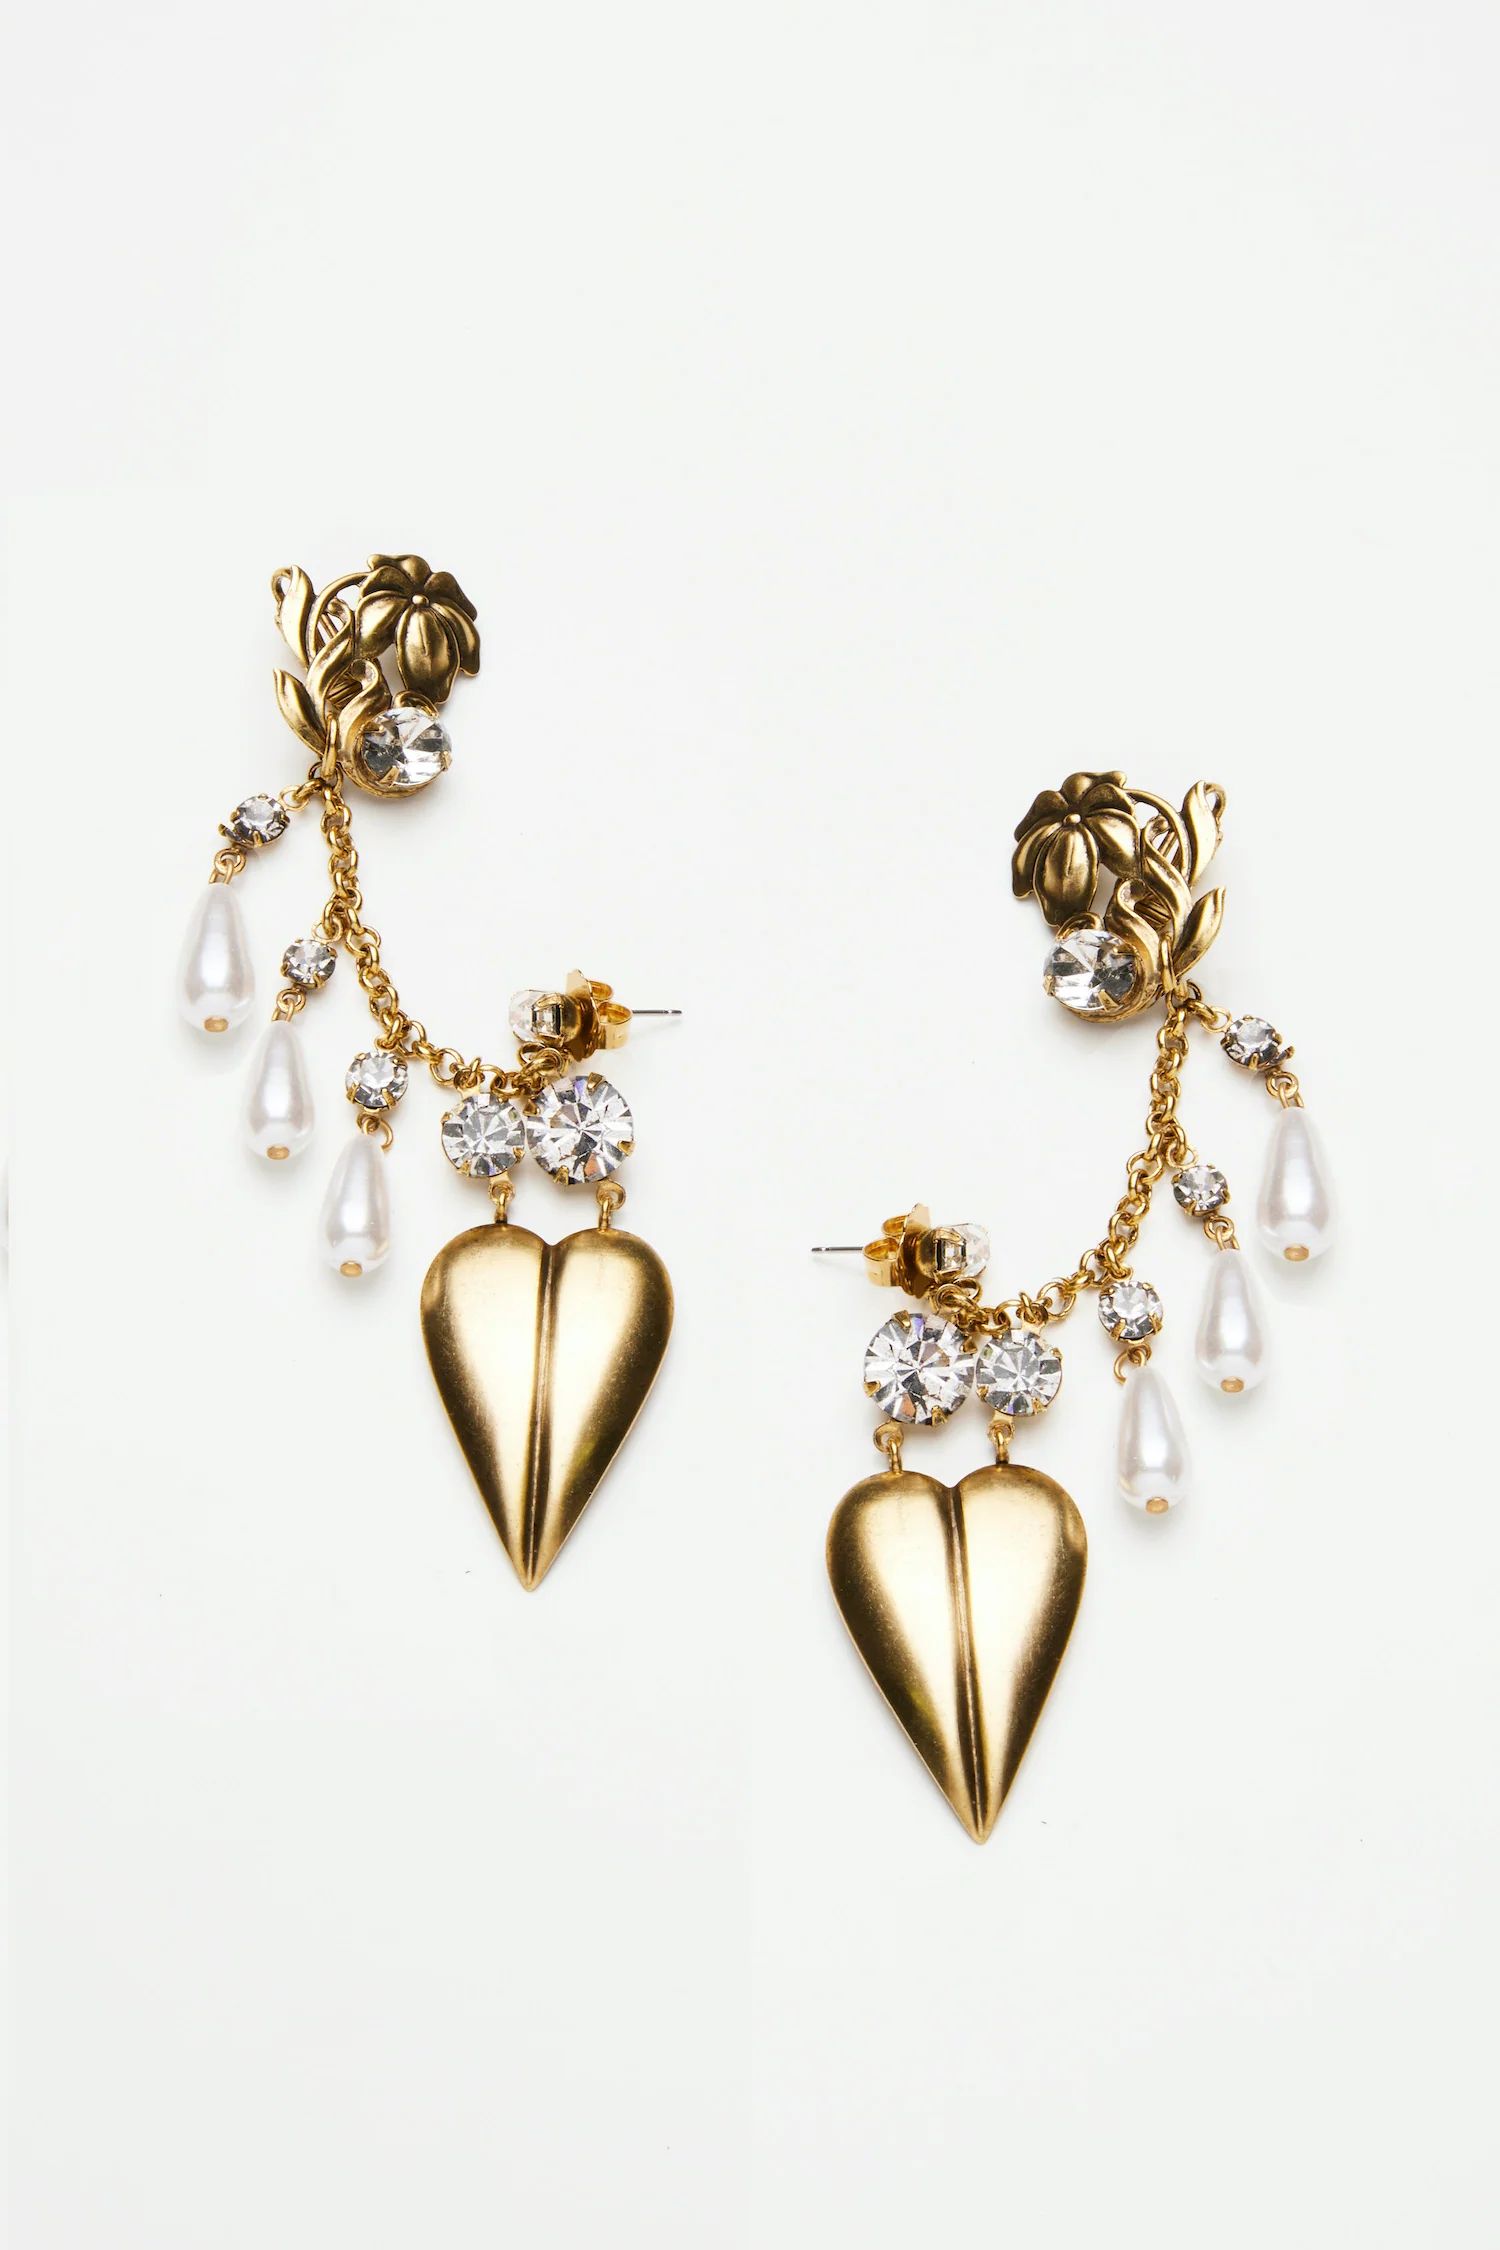 DYLAN LEX | Greer Earrings | 18k Gold Plated mixed with teardrop pearls | DYLANLEX